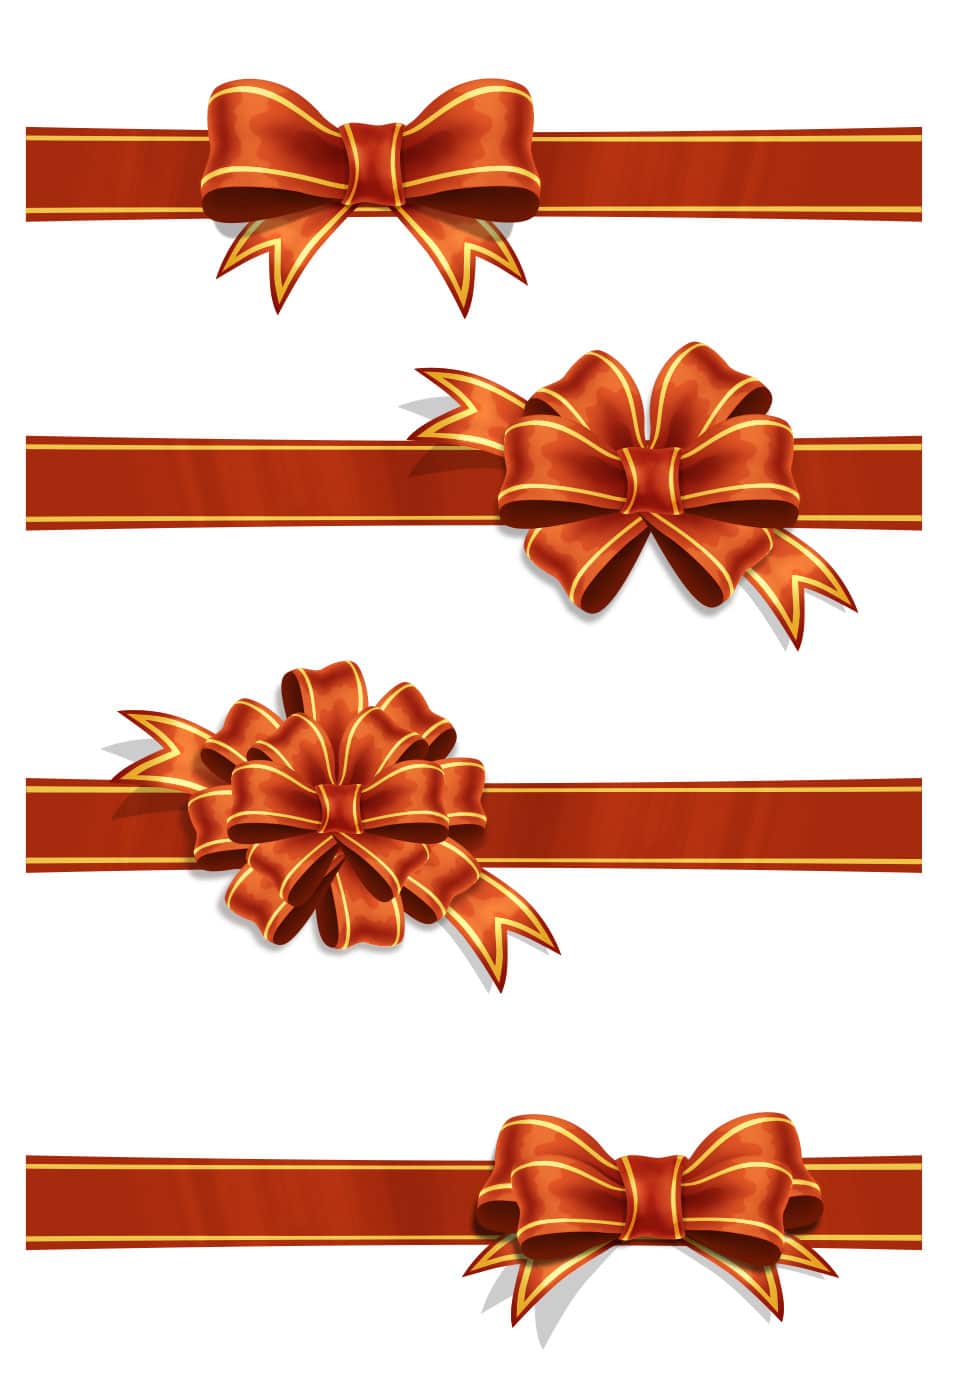 100 Free Ribbons PSD Vector  Files For Your Designs 